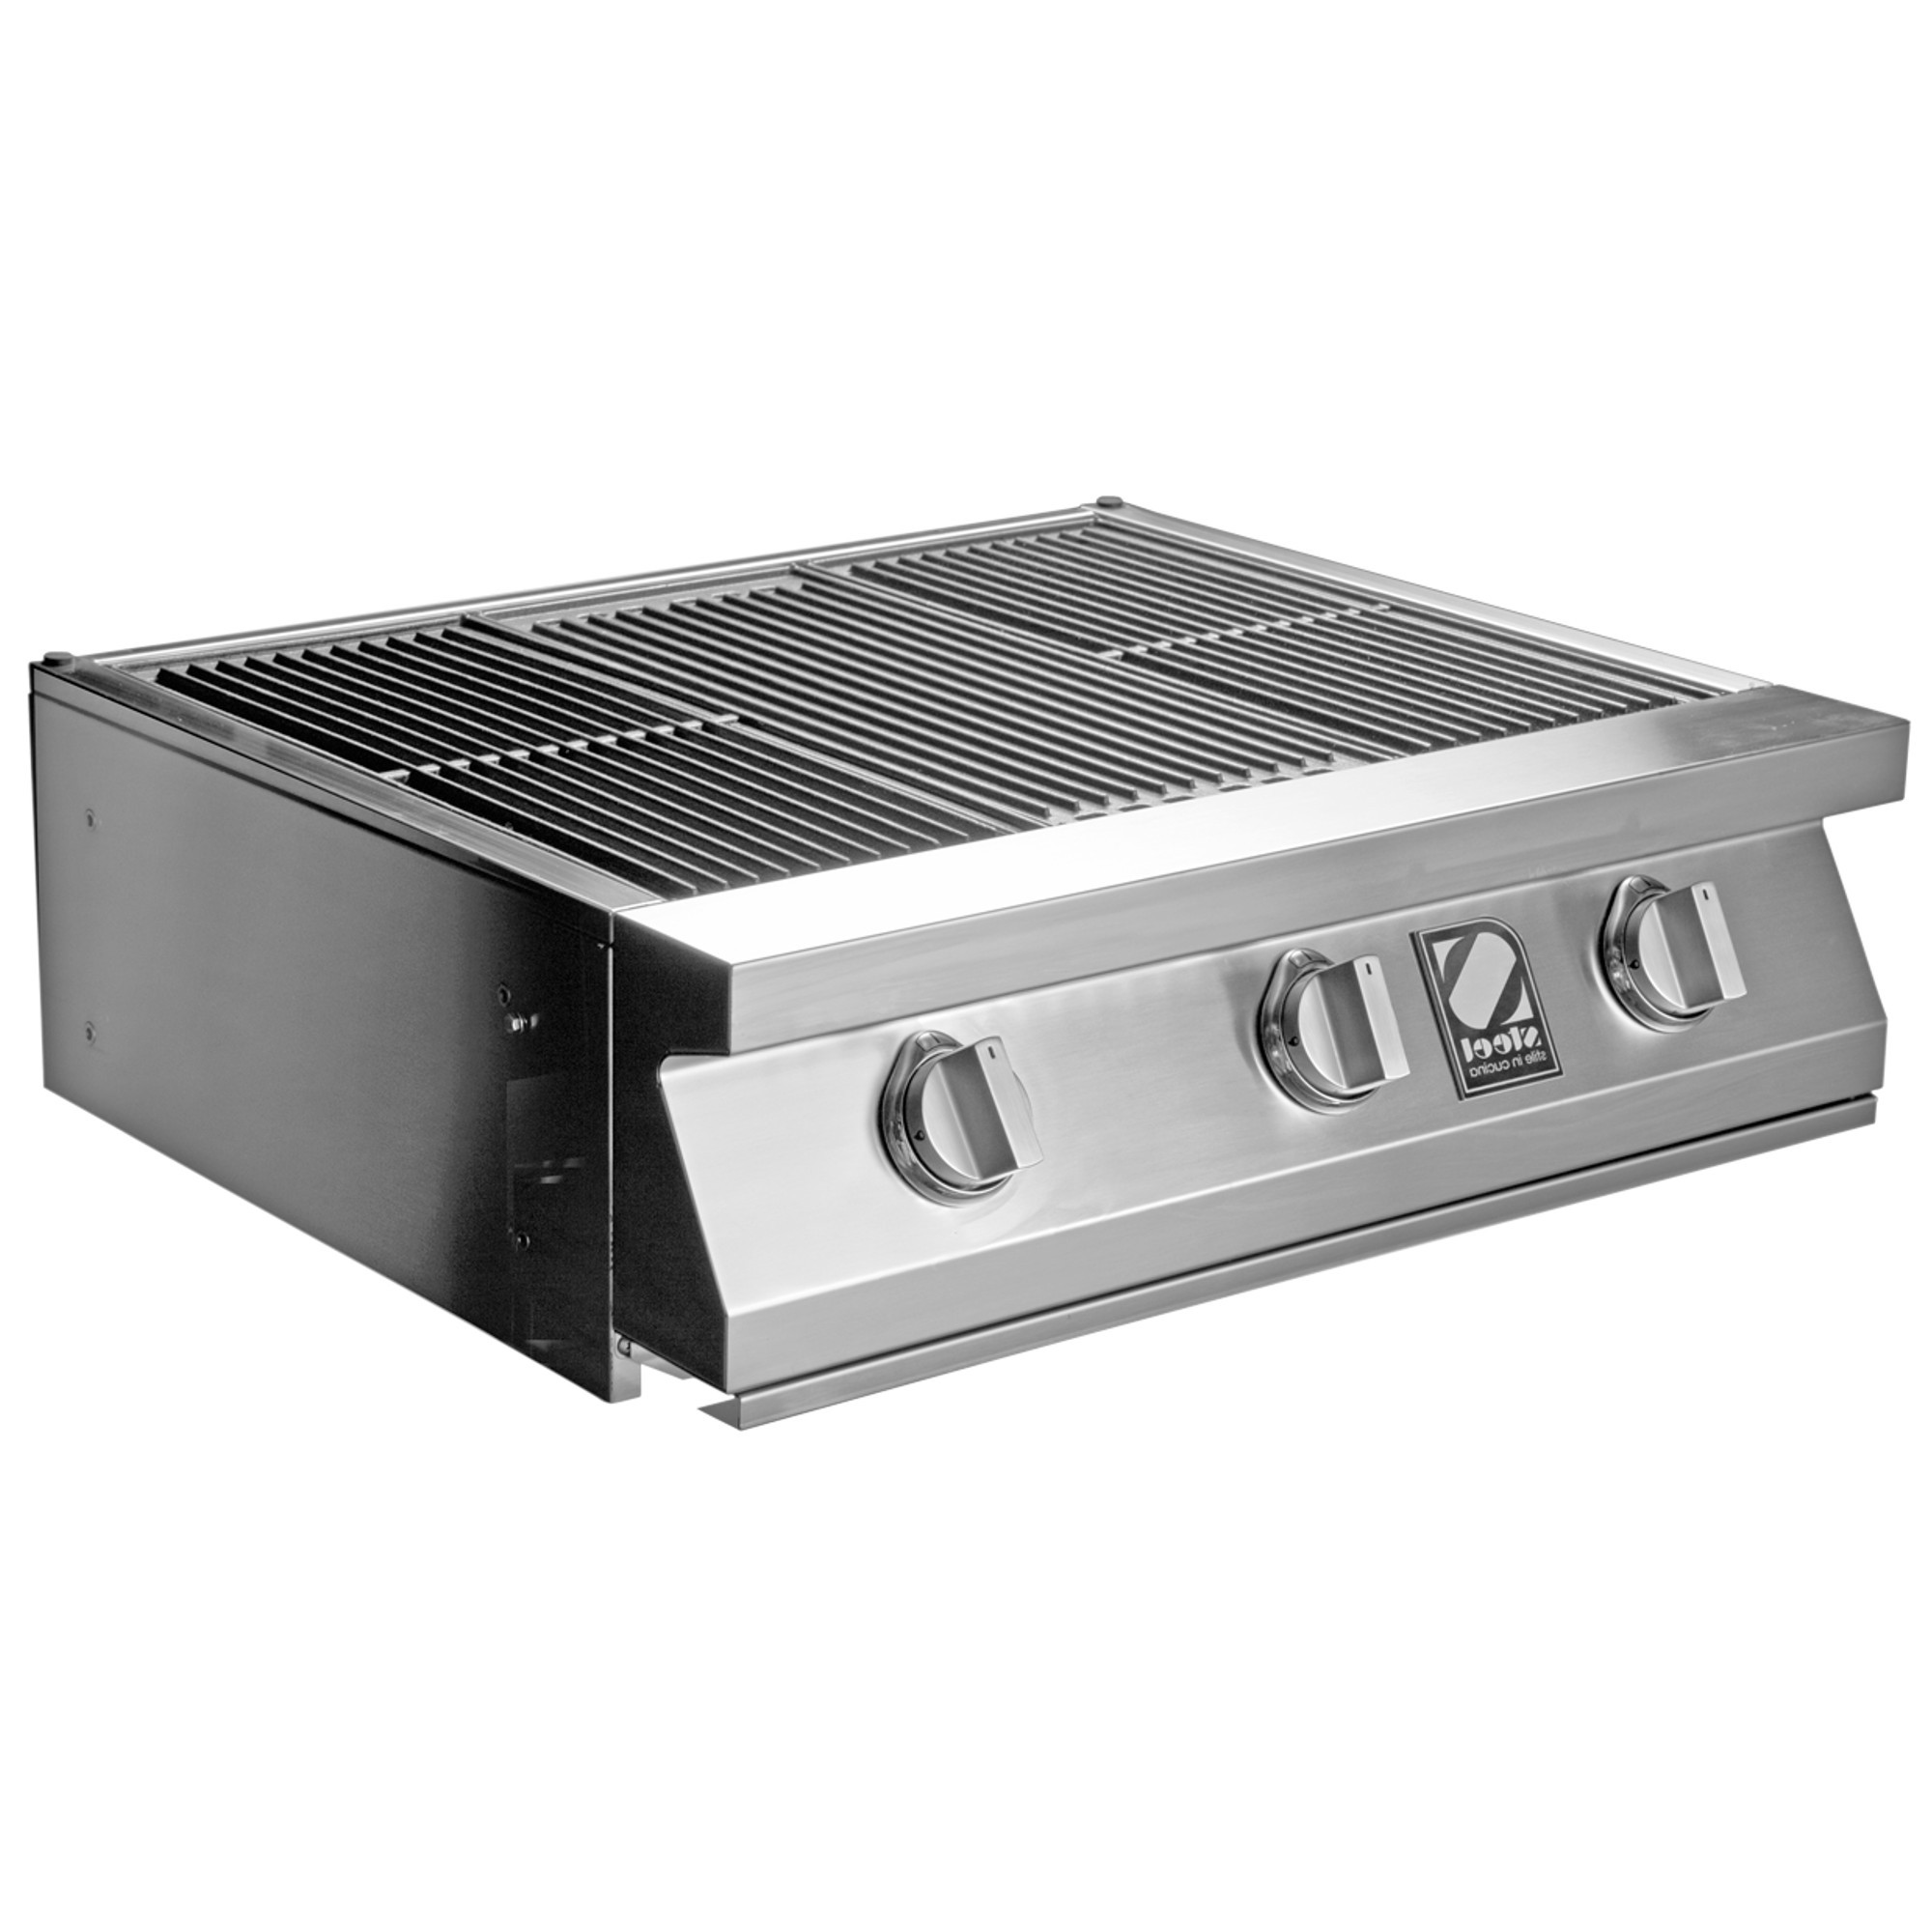 SWING BUILT-IN BBQ, Gas Barbecue, Cooking system